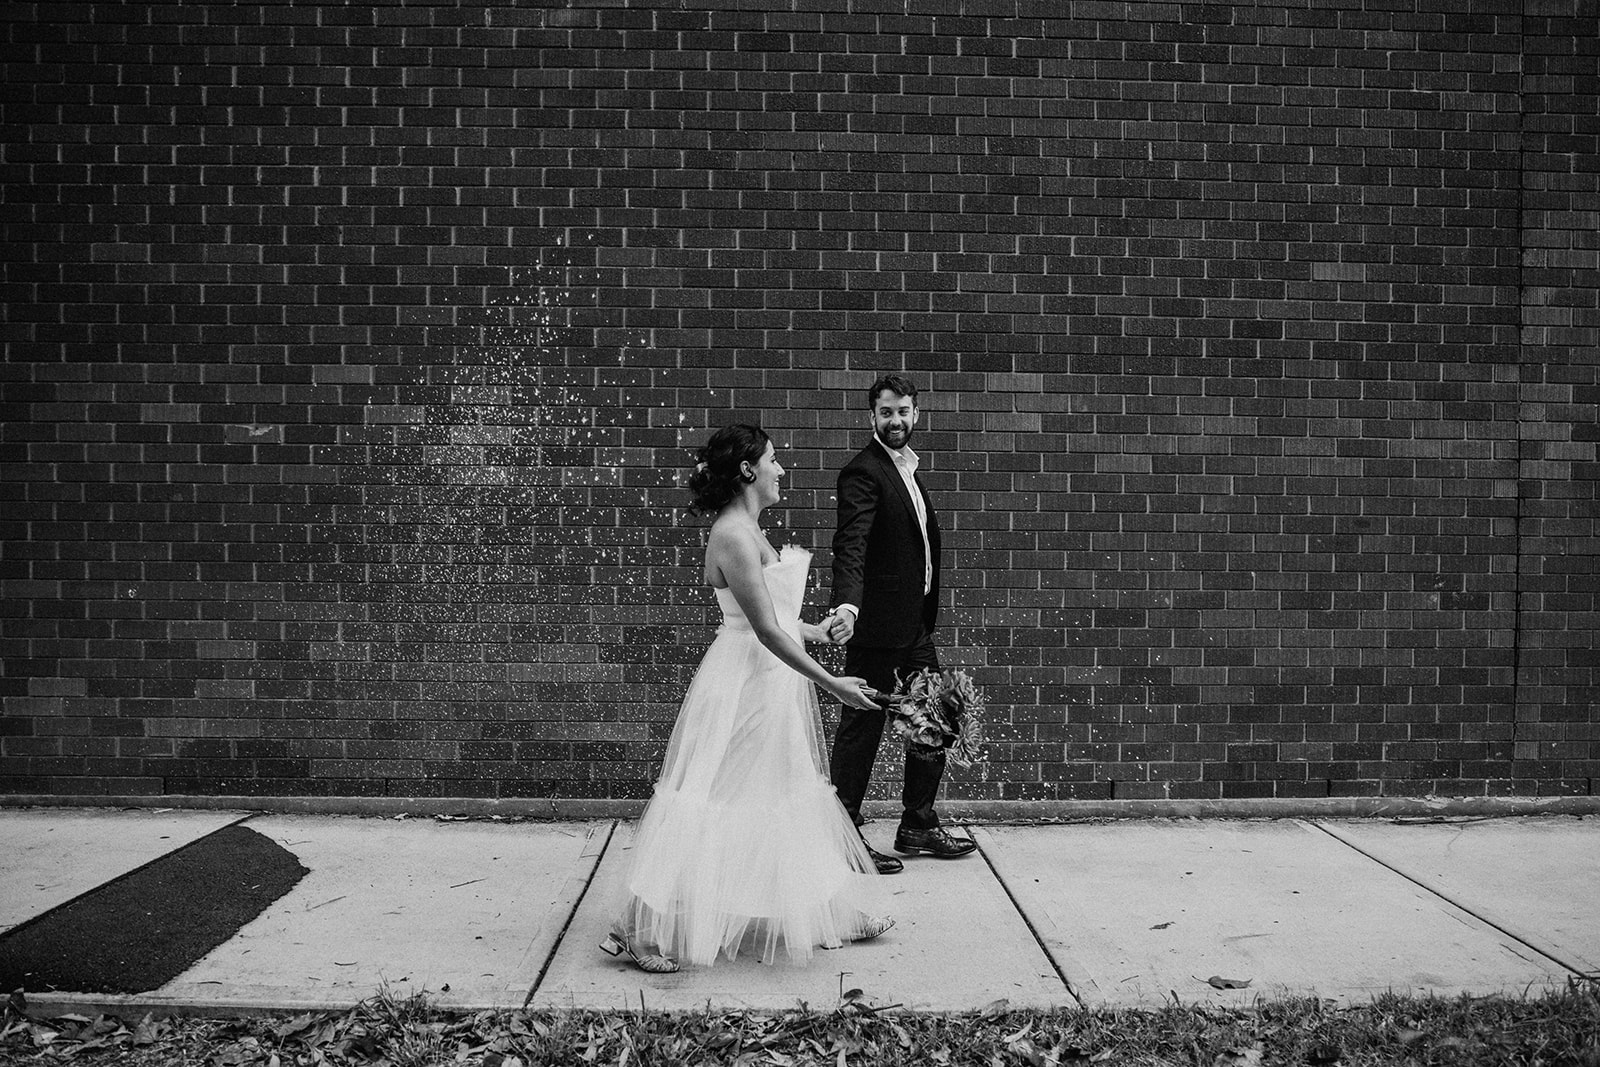 Scott Surplice bride and groom walk past a brick wall with white speckled paint